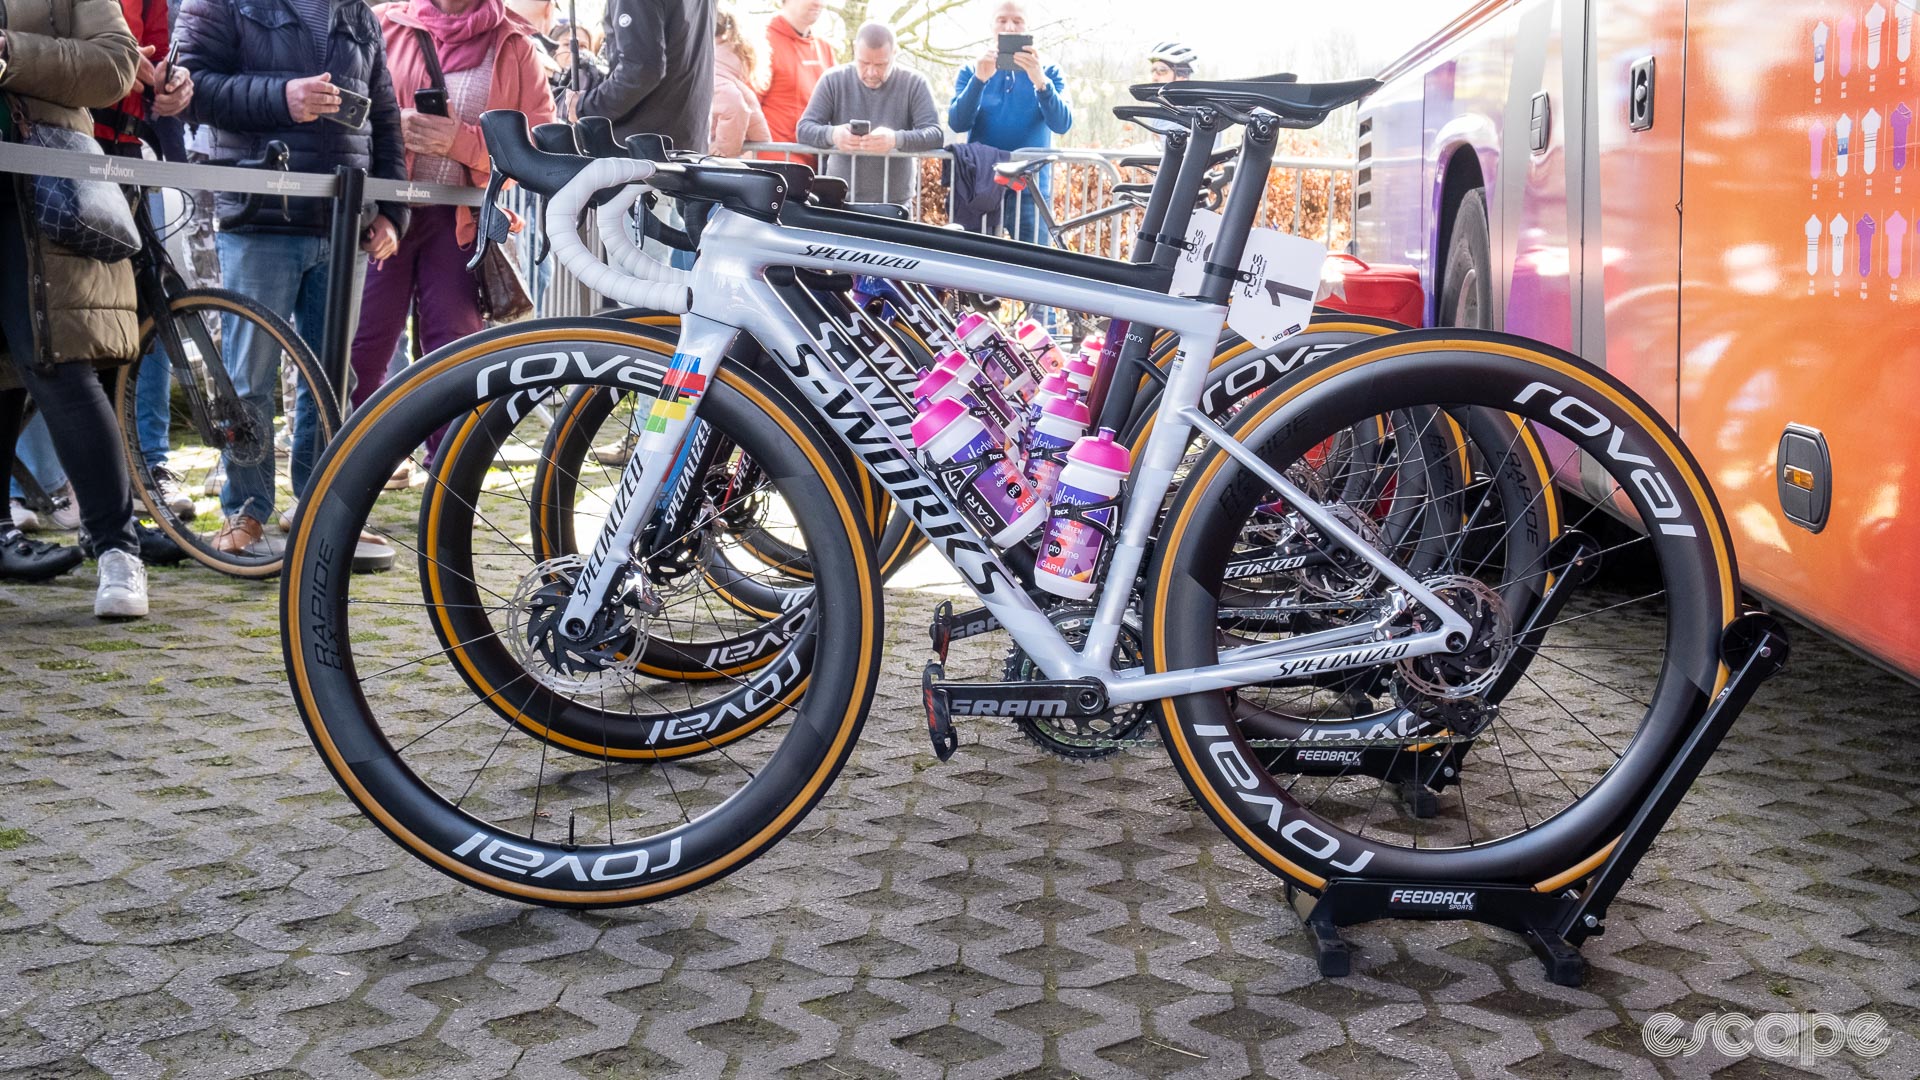 The image shows Lotte Kopecky's World Champion themed white and rainbow band Tarmac SL8.